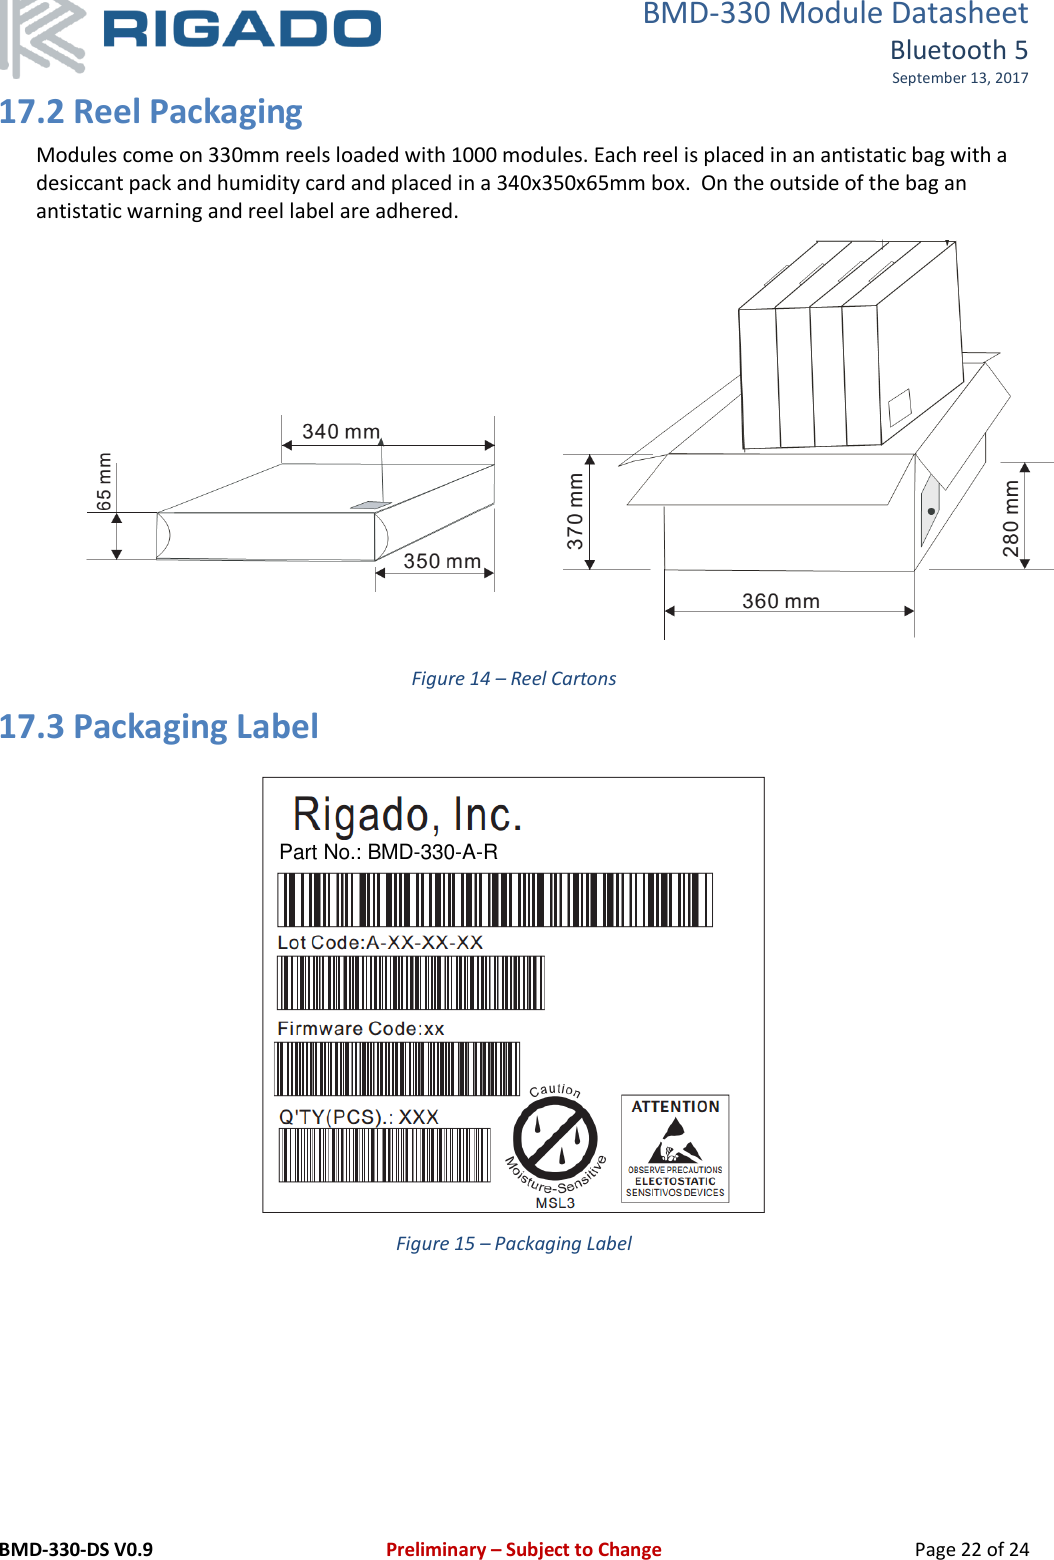 BMD-330 Module Datasheet Bluetooth 5 September 13, 2017 BMD-330-DS V0.9     Preliminary – Subject to Change   Page 22 of 24 17.2 Reel Packaging Modules come on 330mm reels loaded with 1000 modules. Each reel is placed in an antistatic bag with a desiccant pack and humidity card and placed in a 340x350x65mm box.  On the outside of the bag an antistatic warning and reel label are adhered.  Figure 14 – Reel Cartons 17.3 Packaging Label  Figure 15 – Packaging Label    Part No.: BMD-330-A-R 